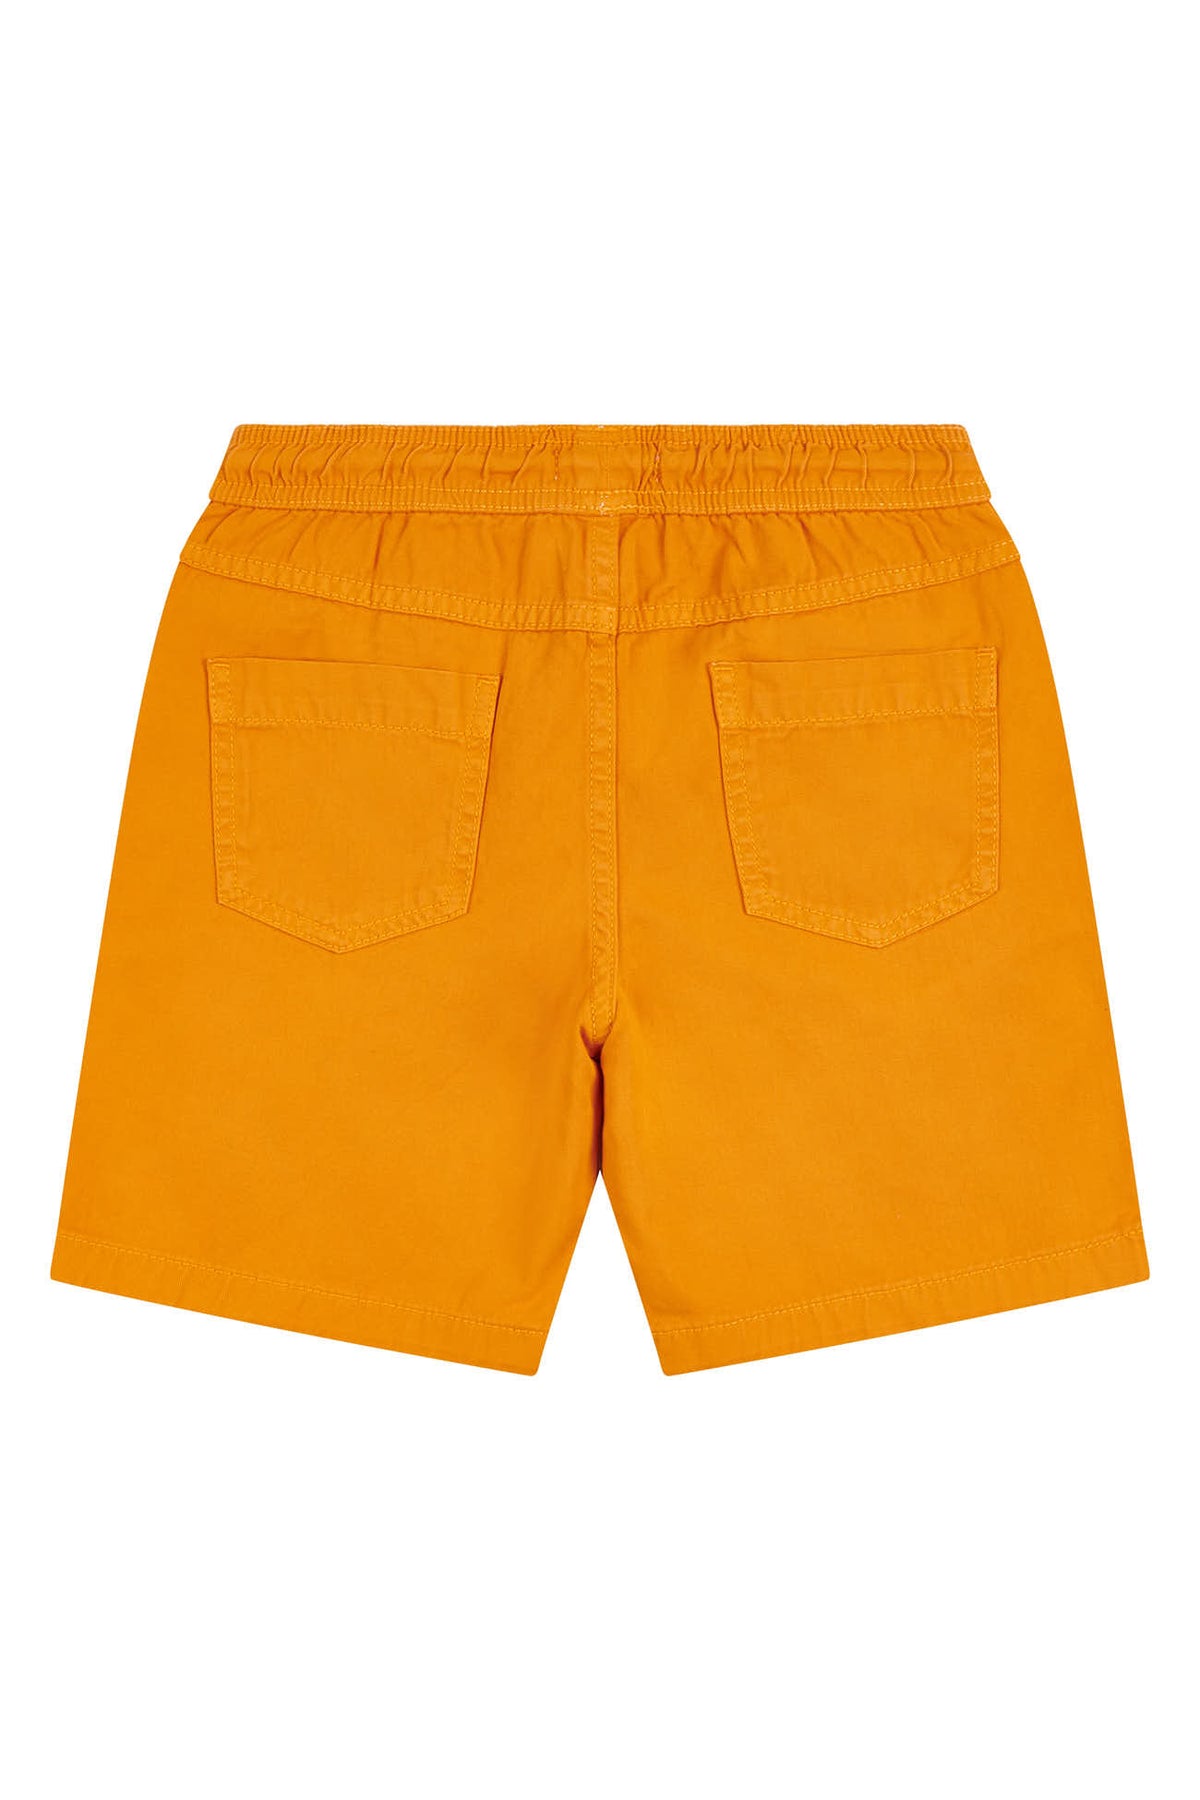 Boys Classic Shorts in Apricot